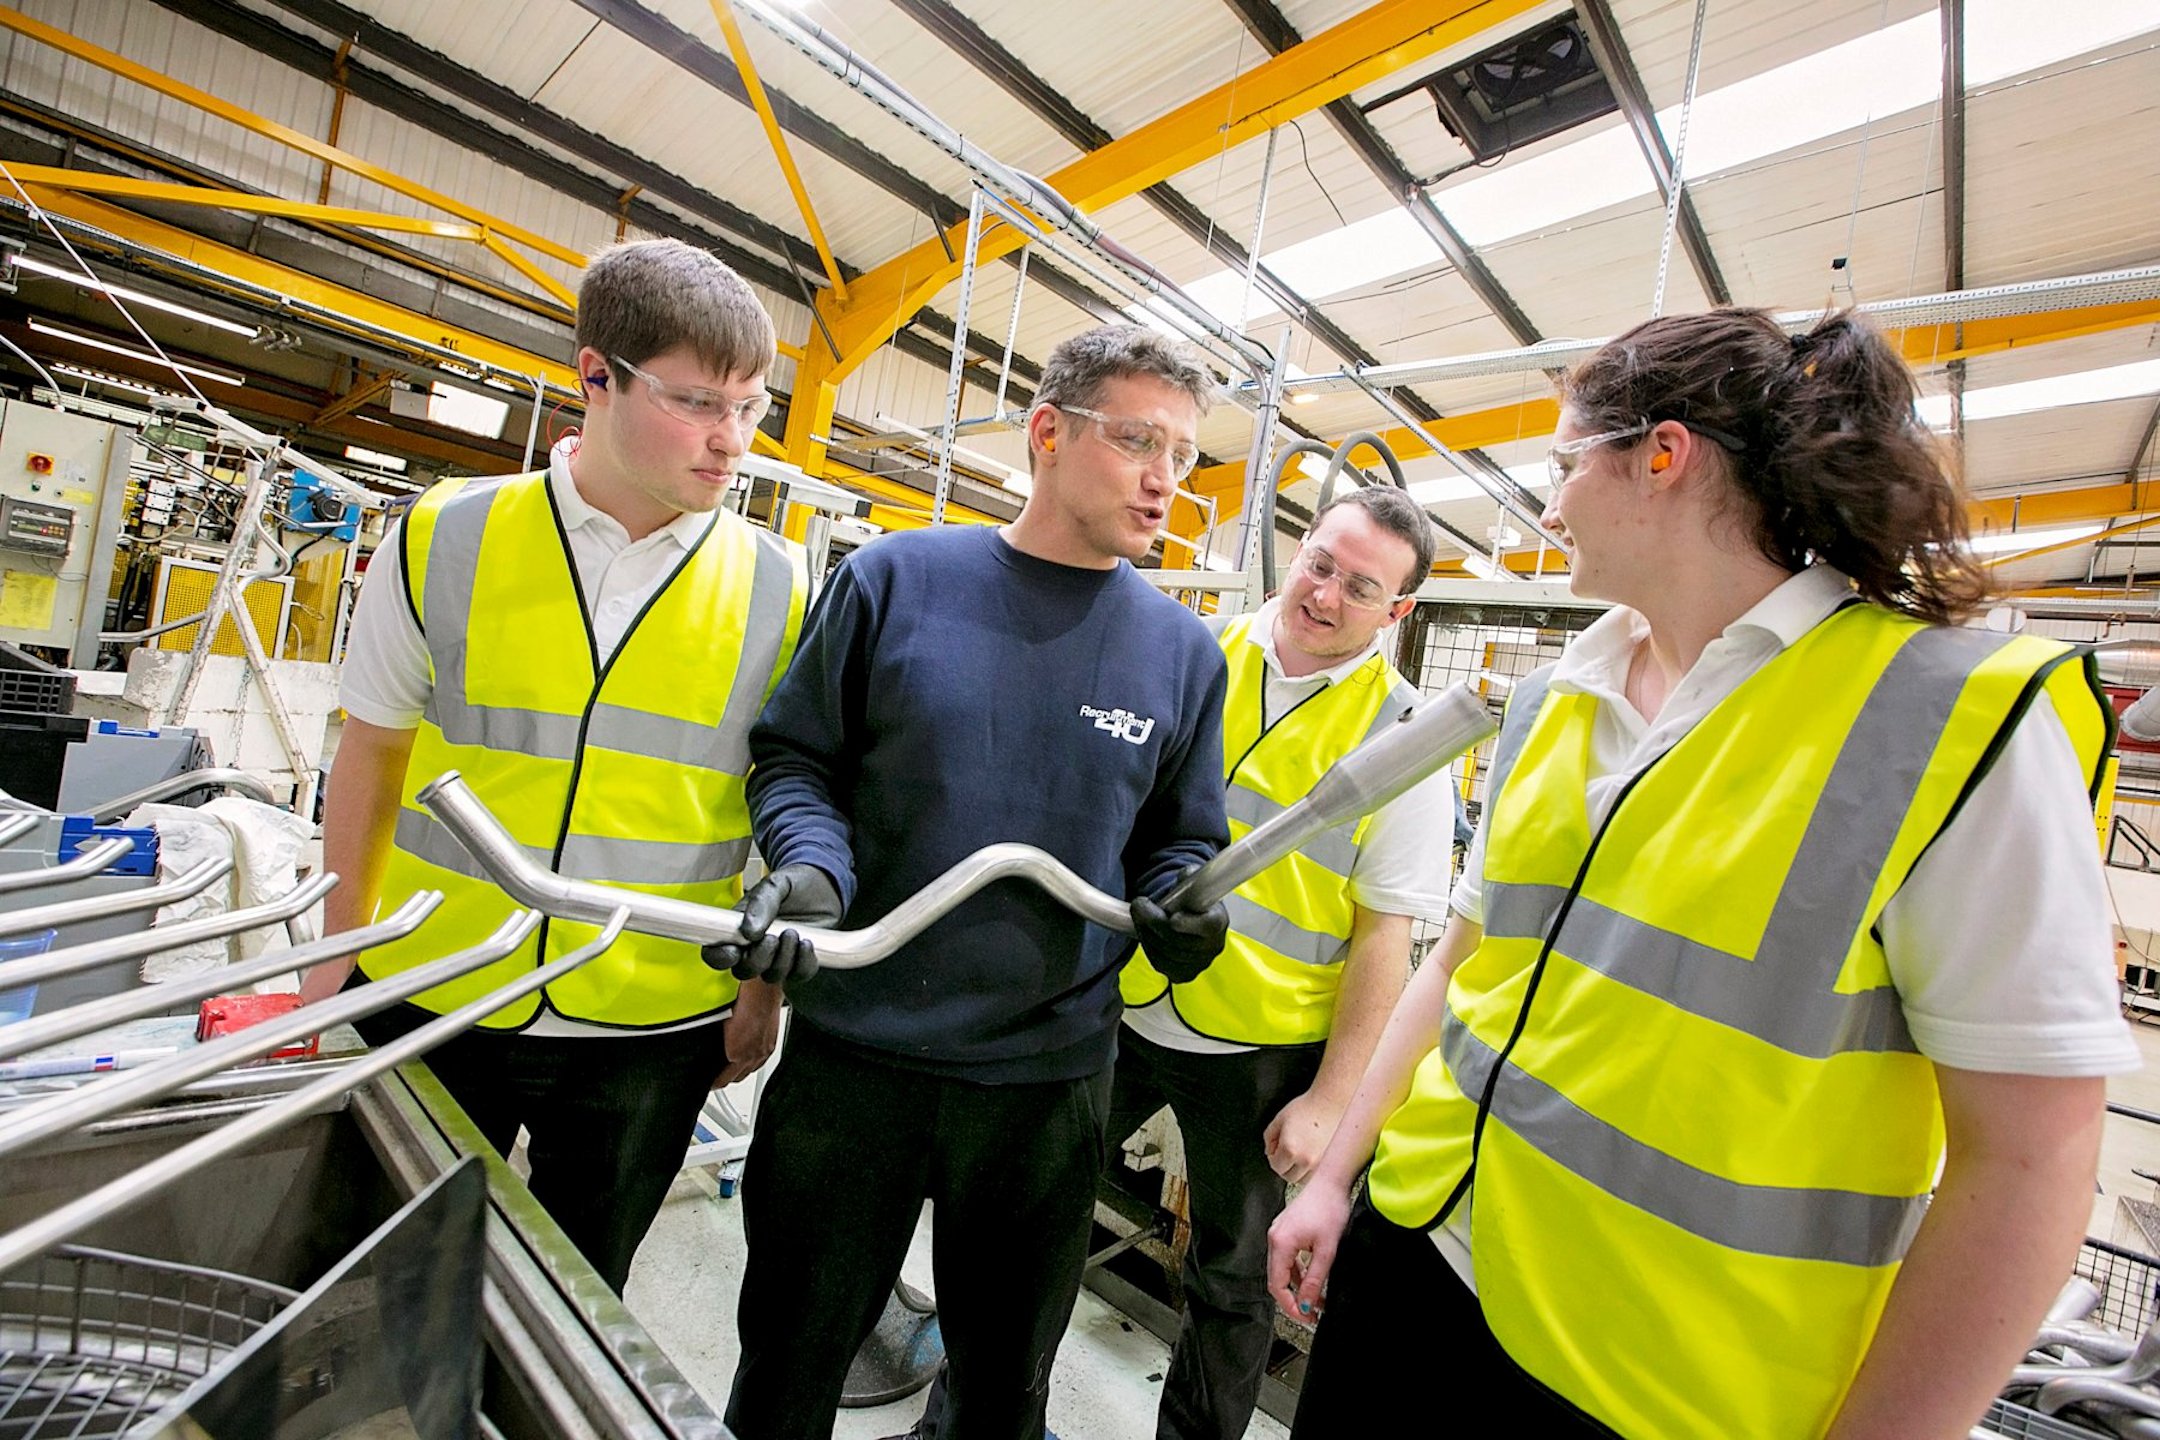 Movement to Work is a collaboration of Britain’s leading employers supporting unemployed young people into jobs or further education or training.